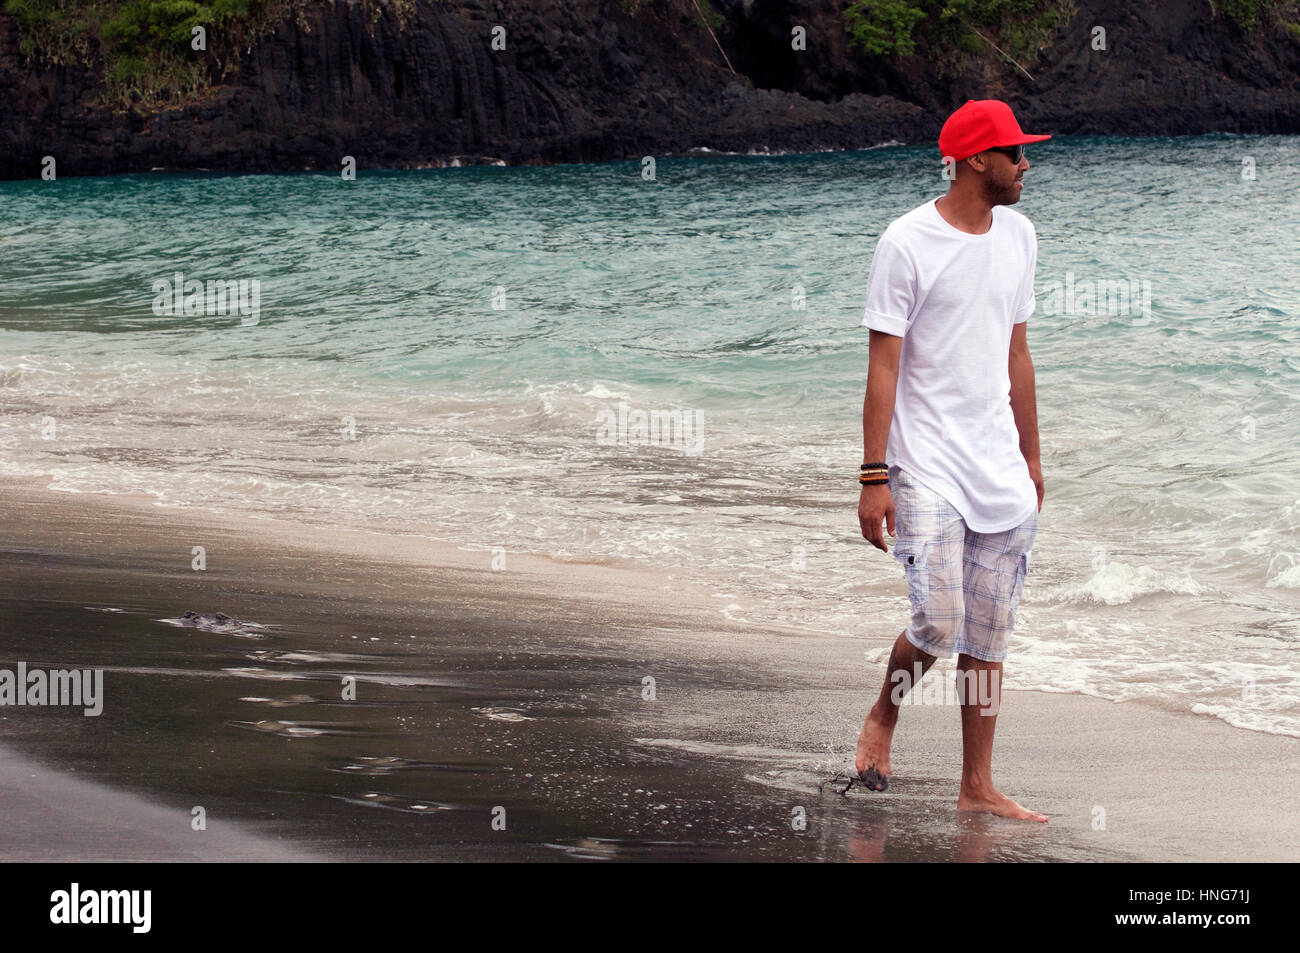 Cool Dude Strolls Along Sandy Beach in Bali Indonesia Wearing Red Baseball Hat, White T-Shirt and Short Pants Stock Photo